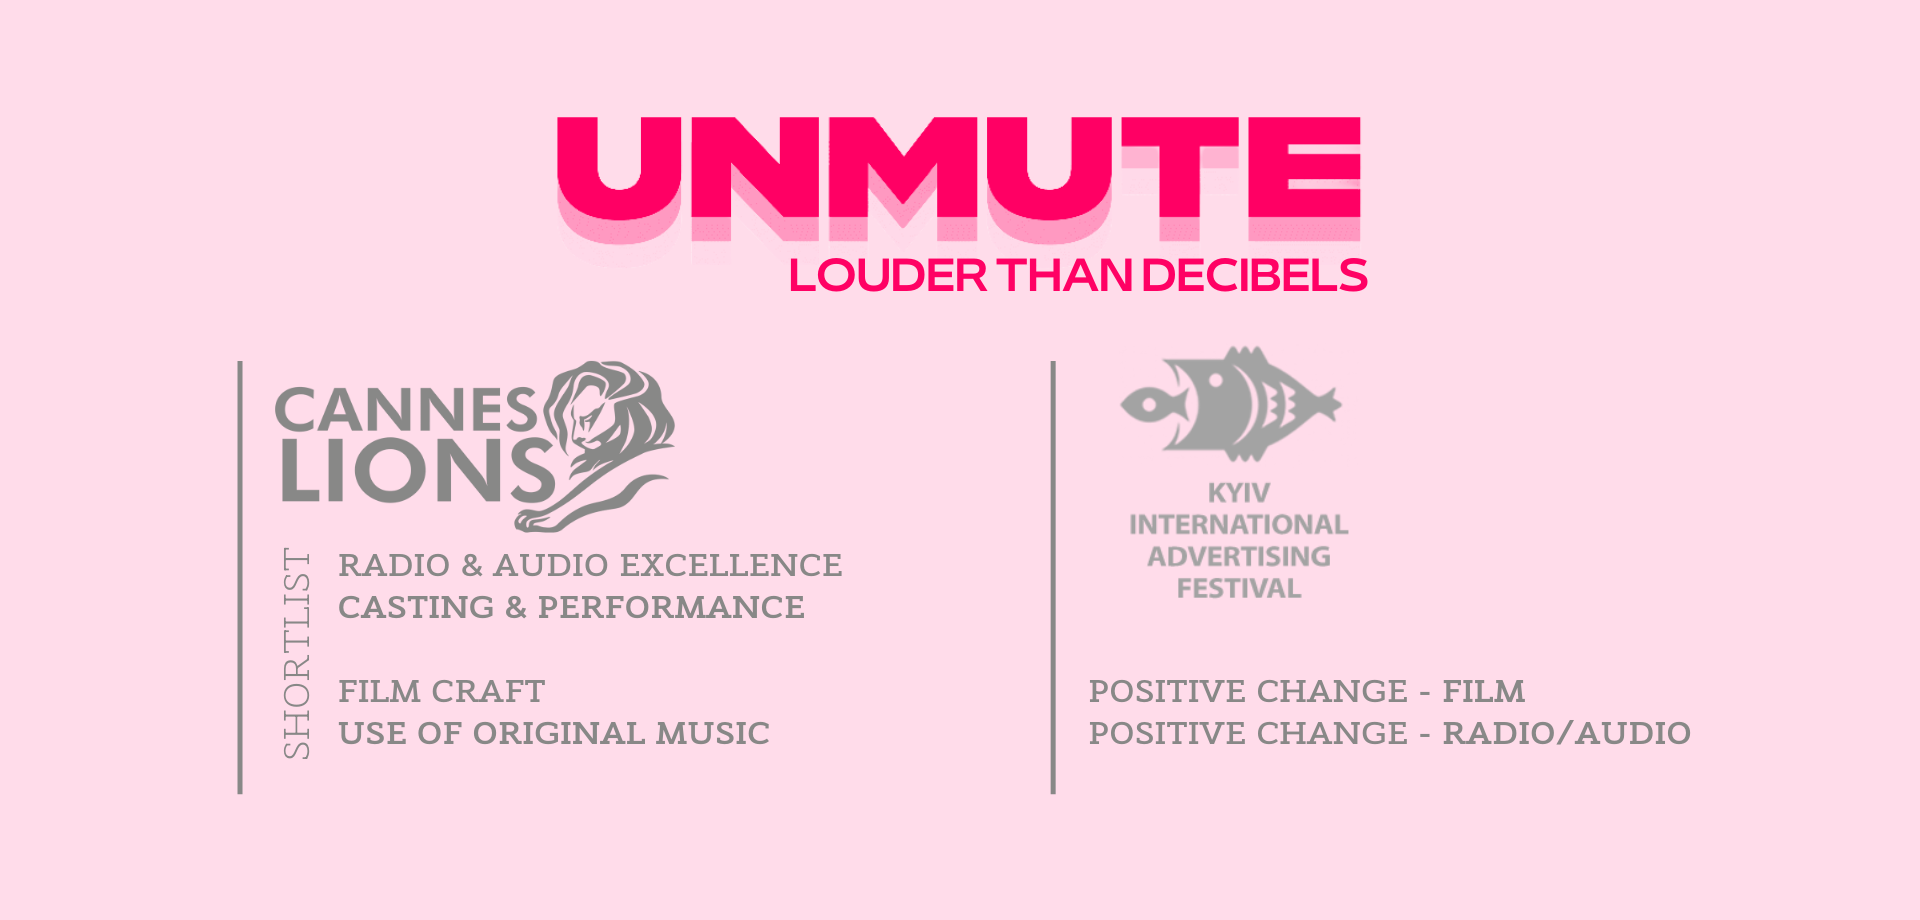 4 international awards for "unmute" campaign